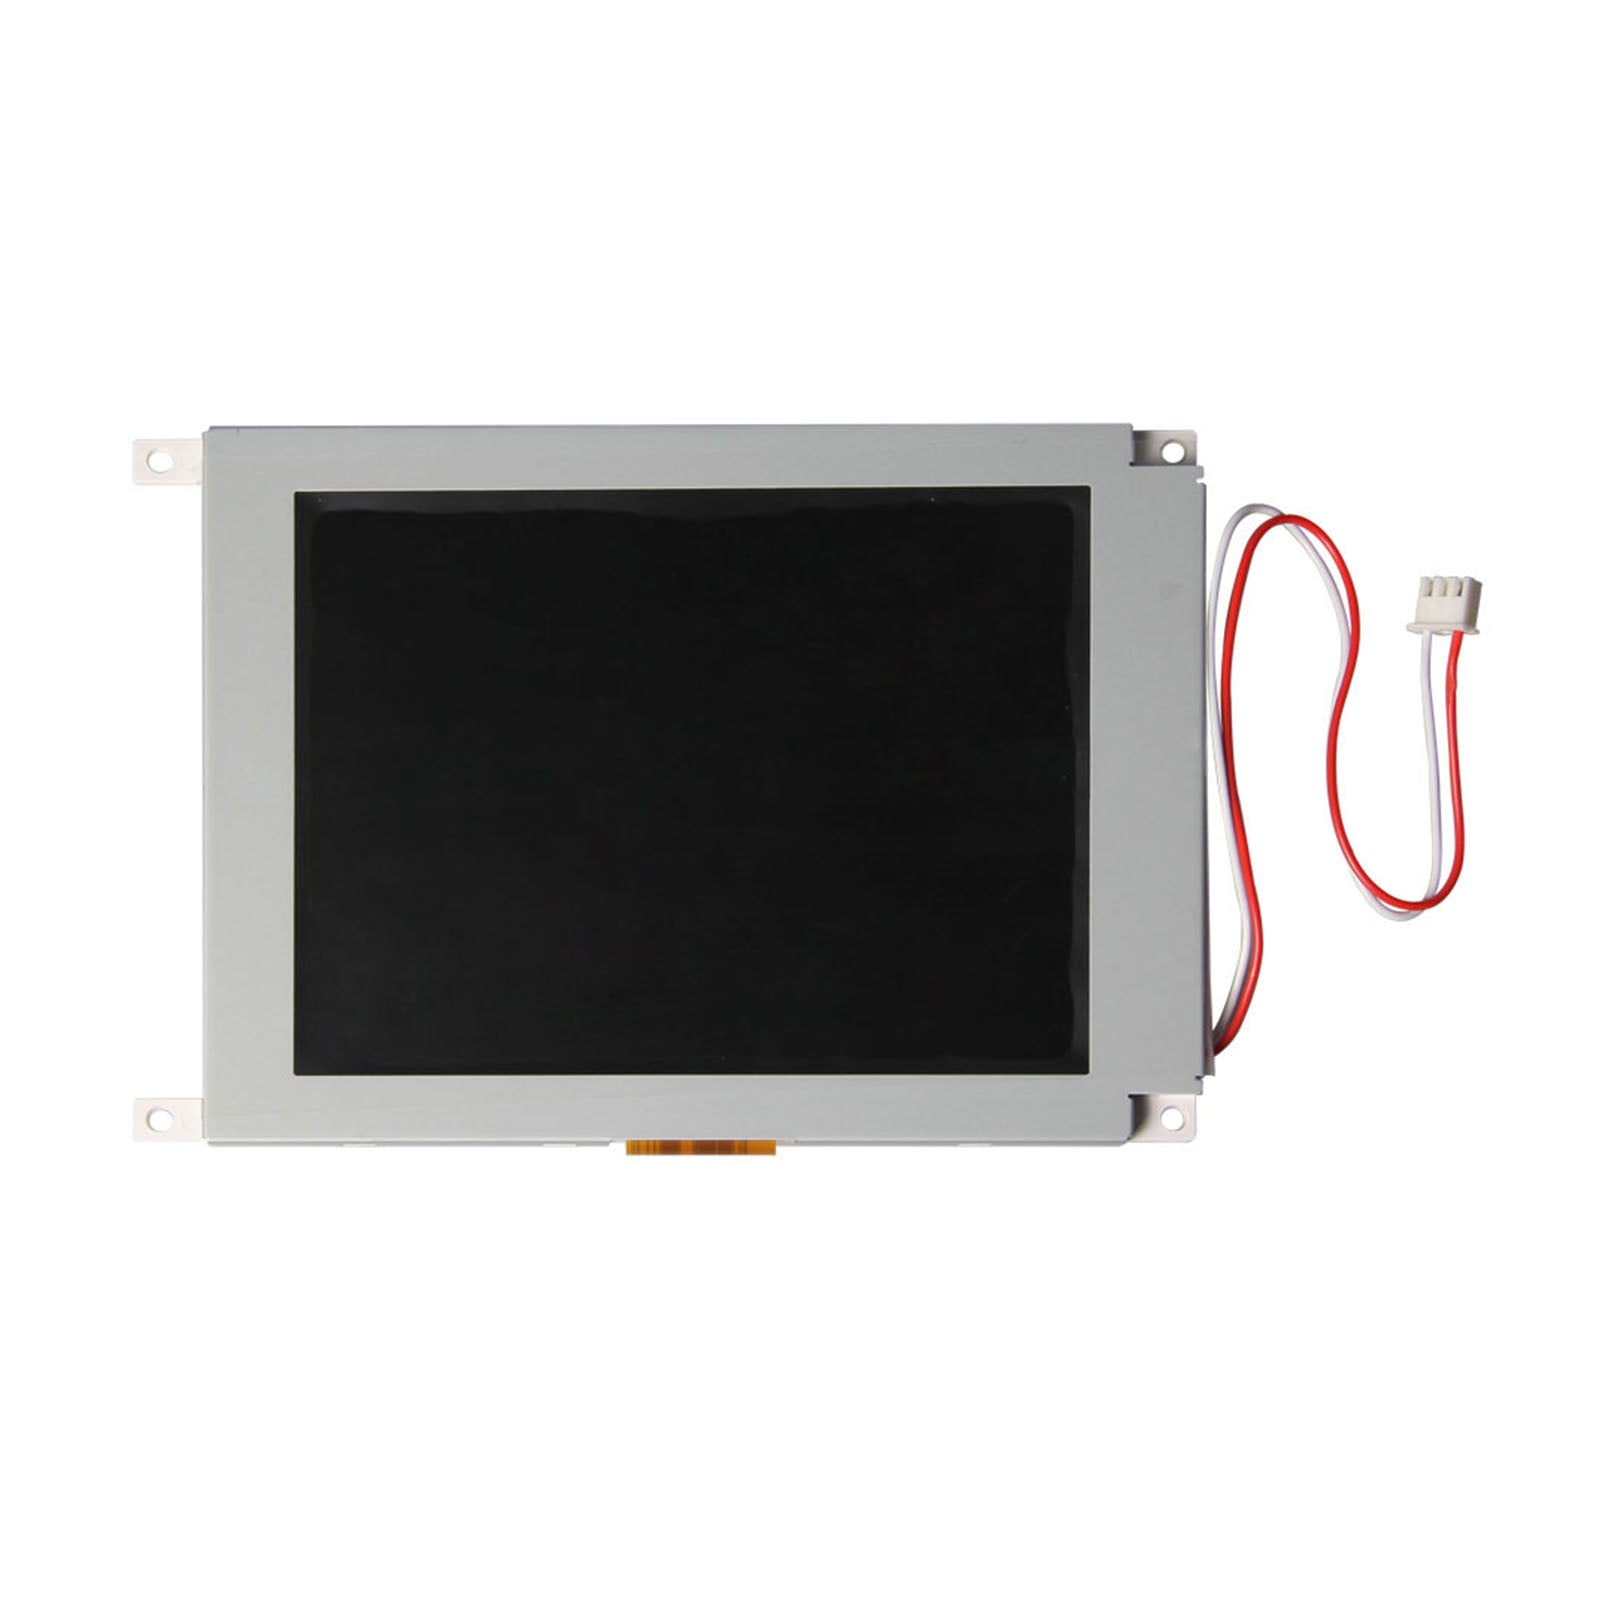 5.7-inch TFT display module with a 320x240 resolution, connected via MCU